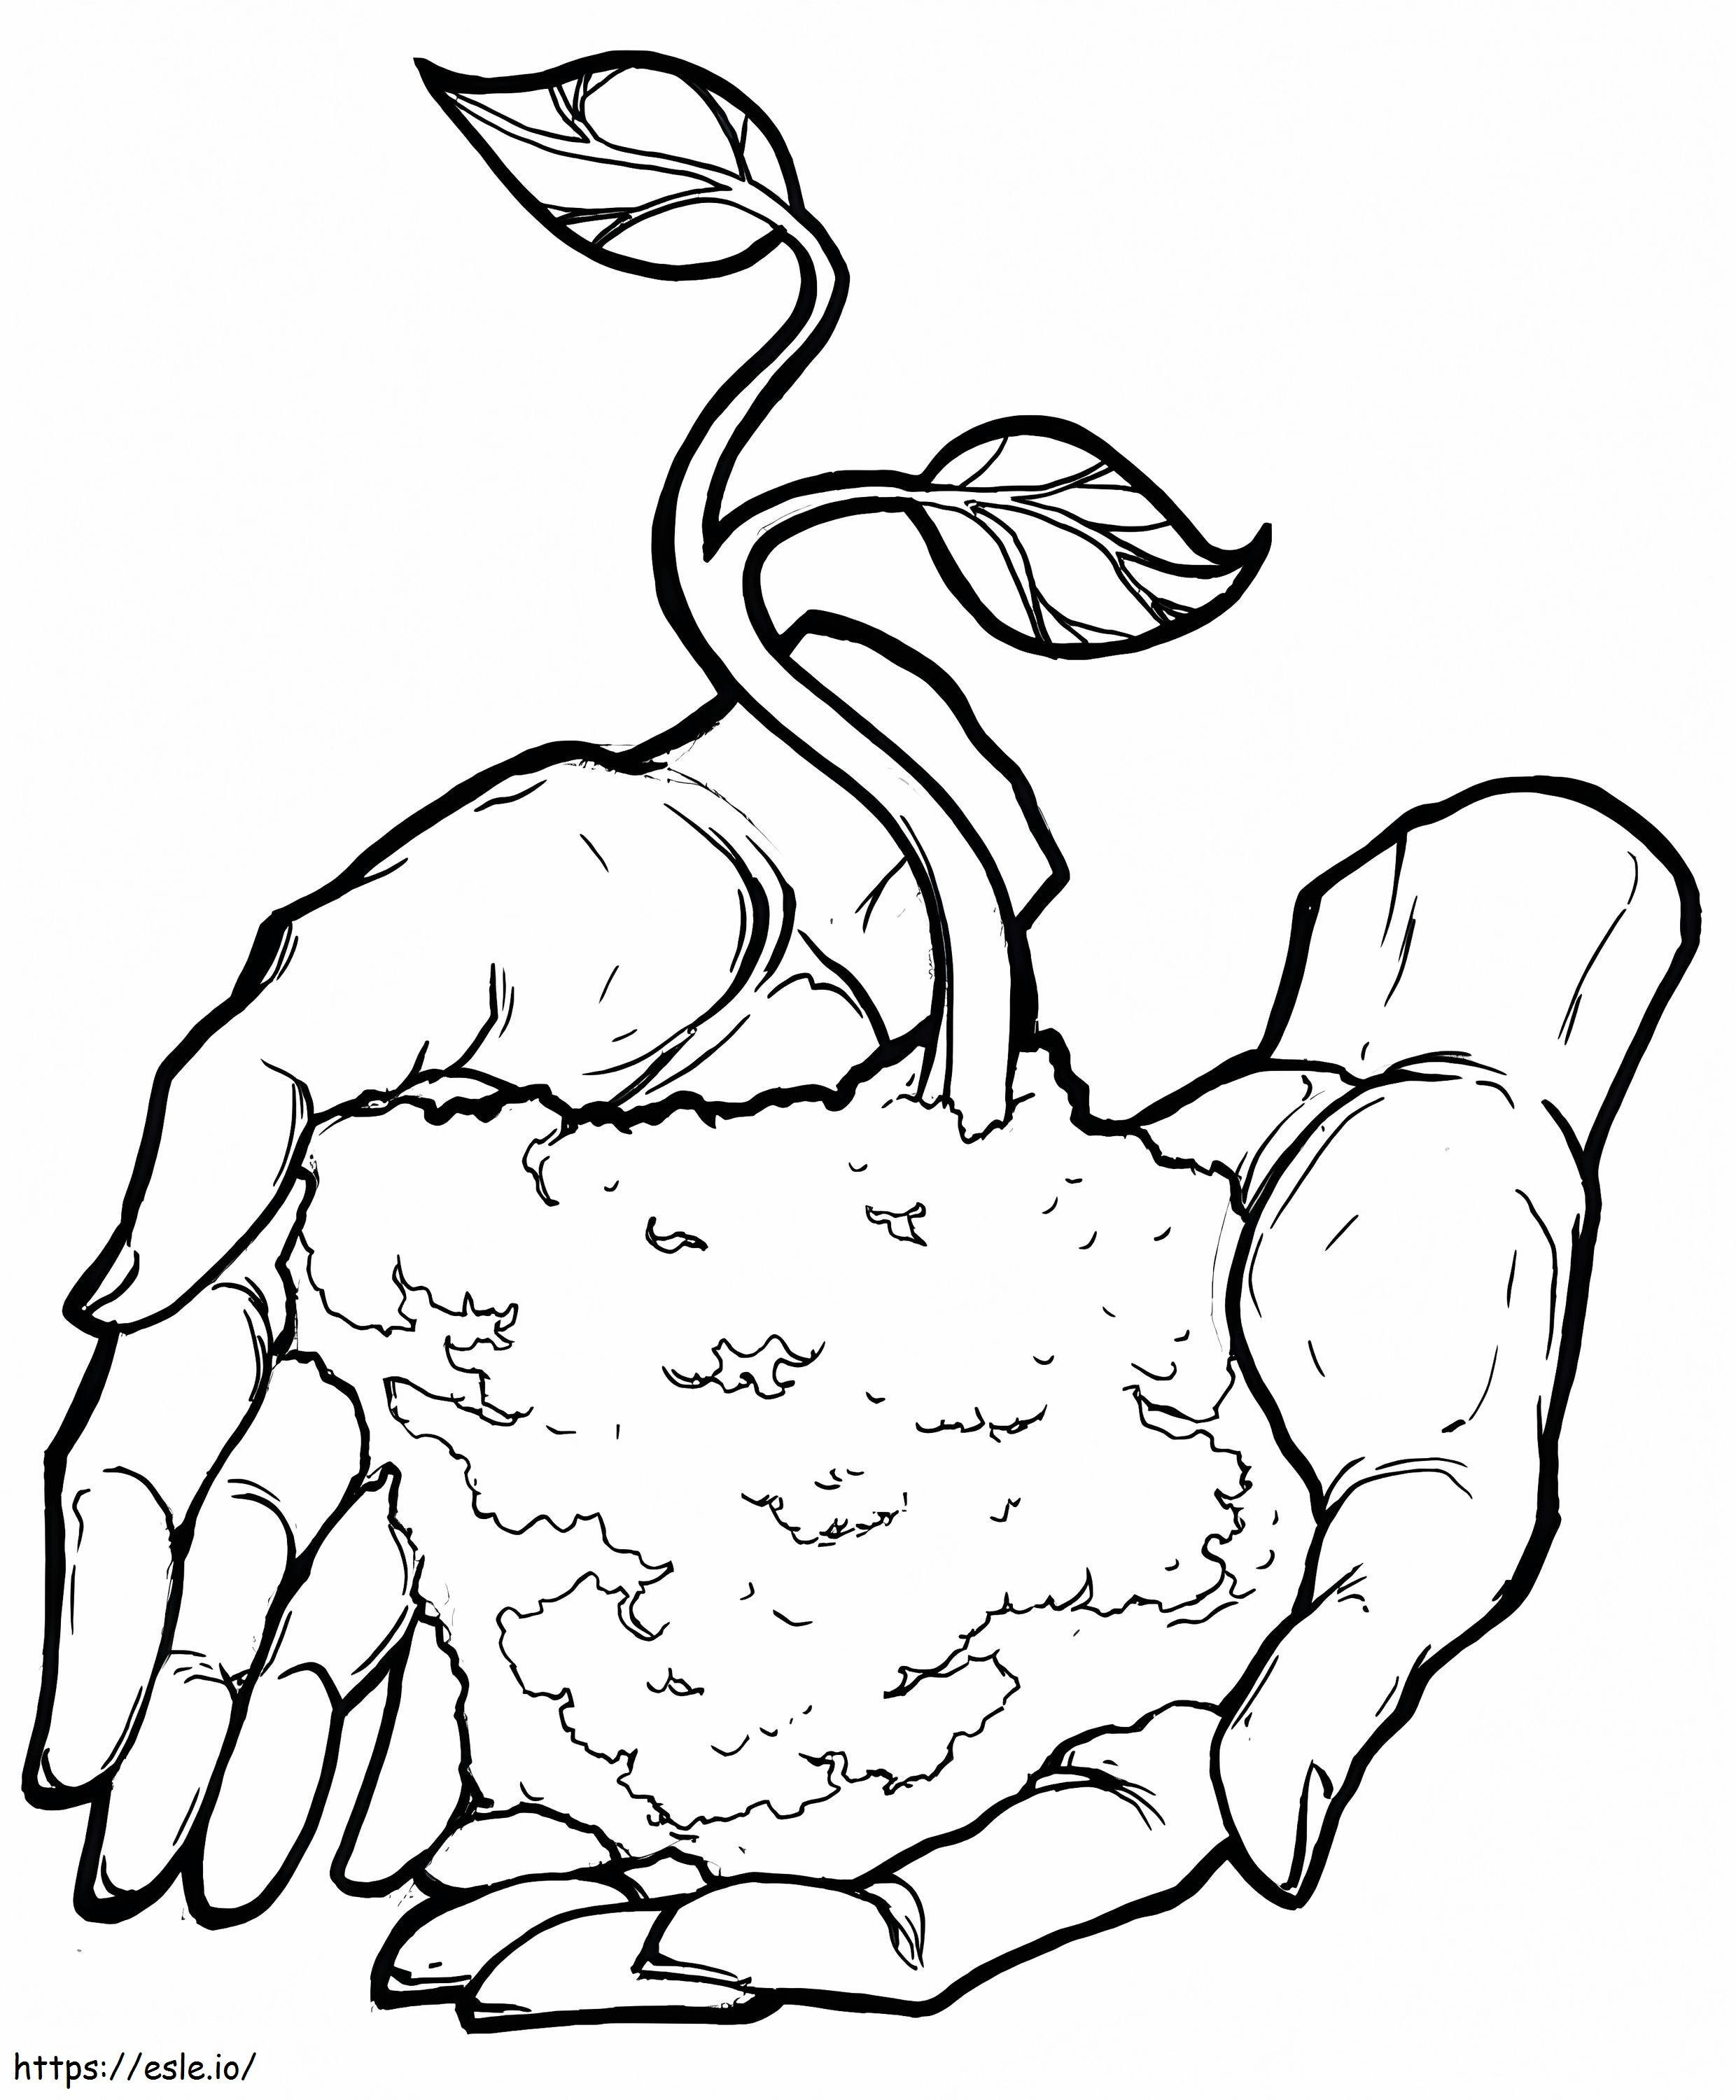 Happy Earth Day coloring page